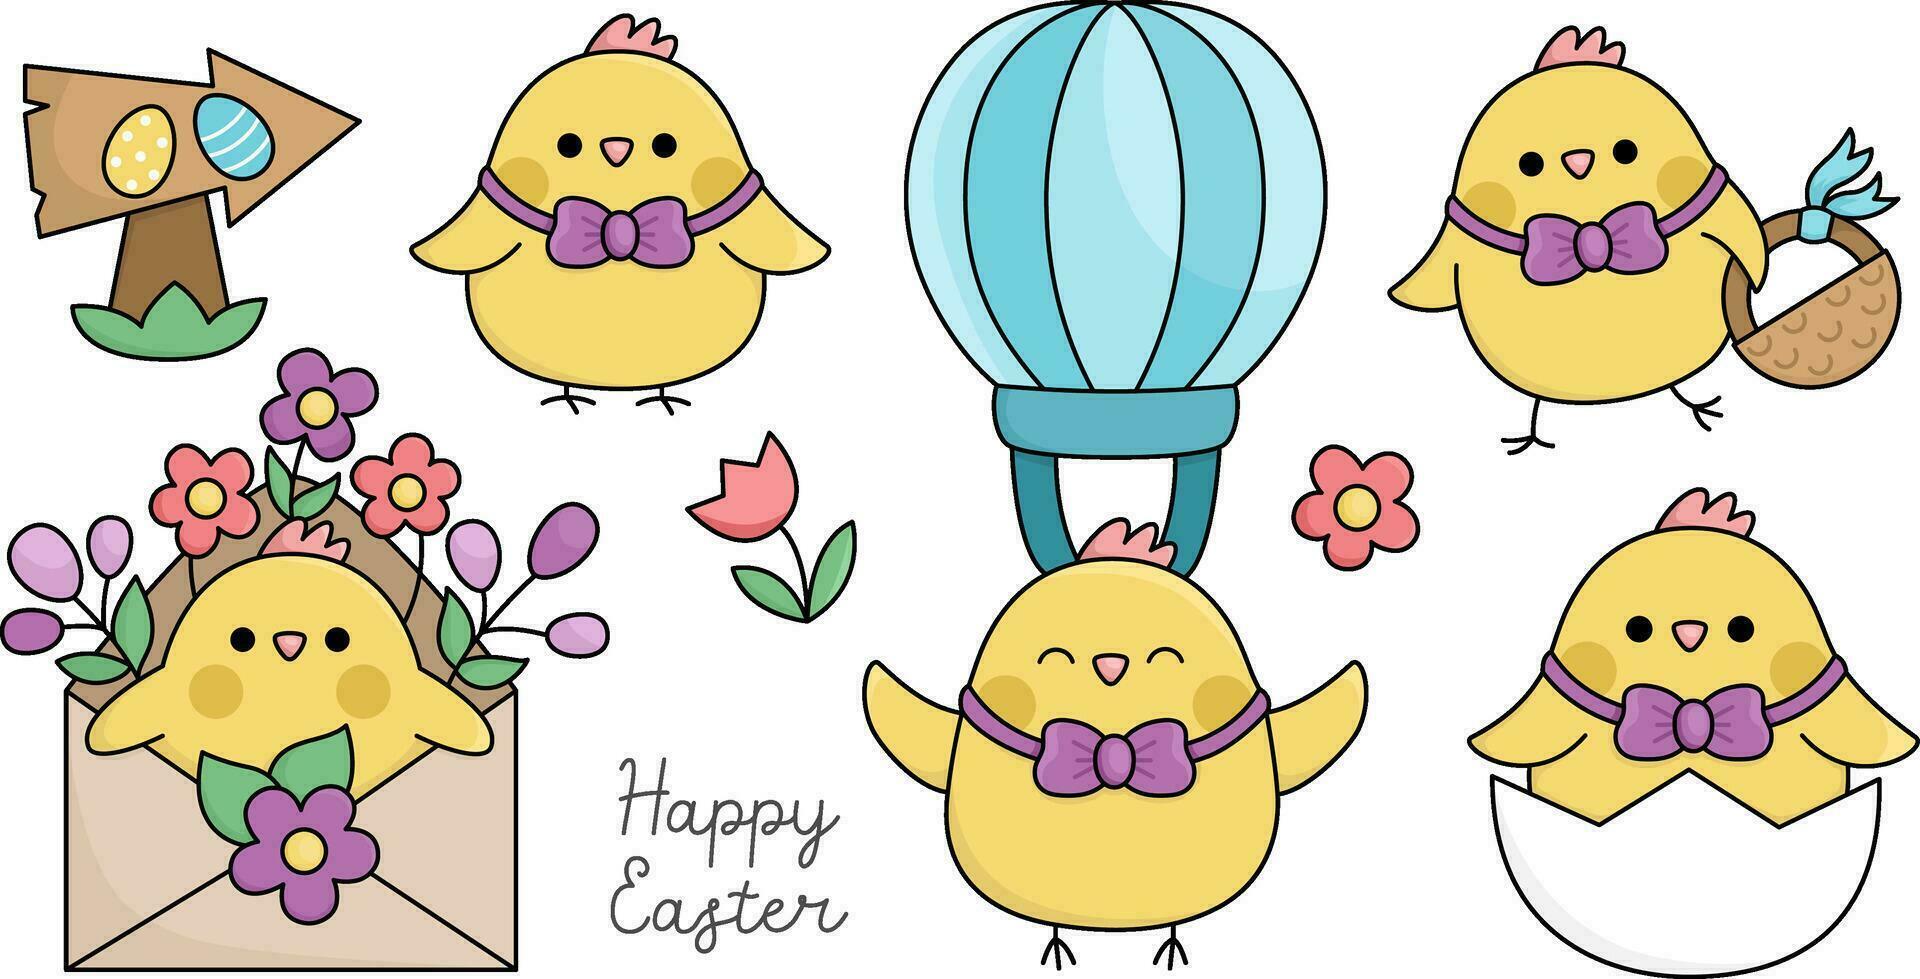 Vector Easter chicks set for kids. Cute kawaii chickens collection. Funny cartoon characters. Traditional spring holiday symbol illustration with bird with basket, eggs, flying on hot air balloon